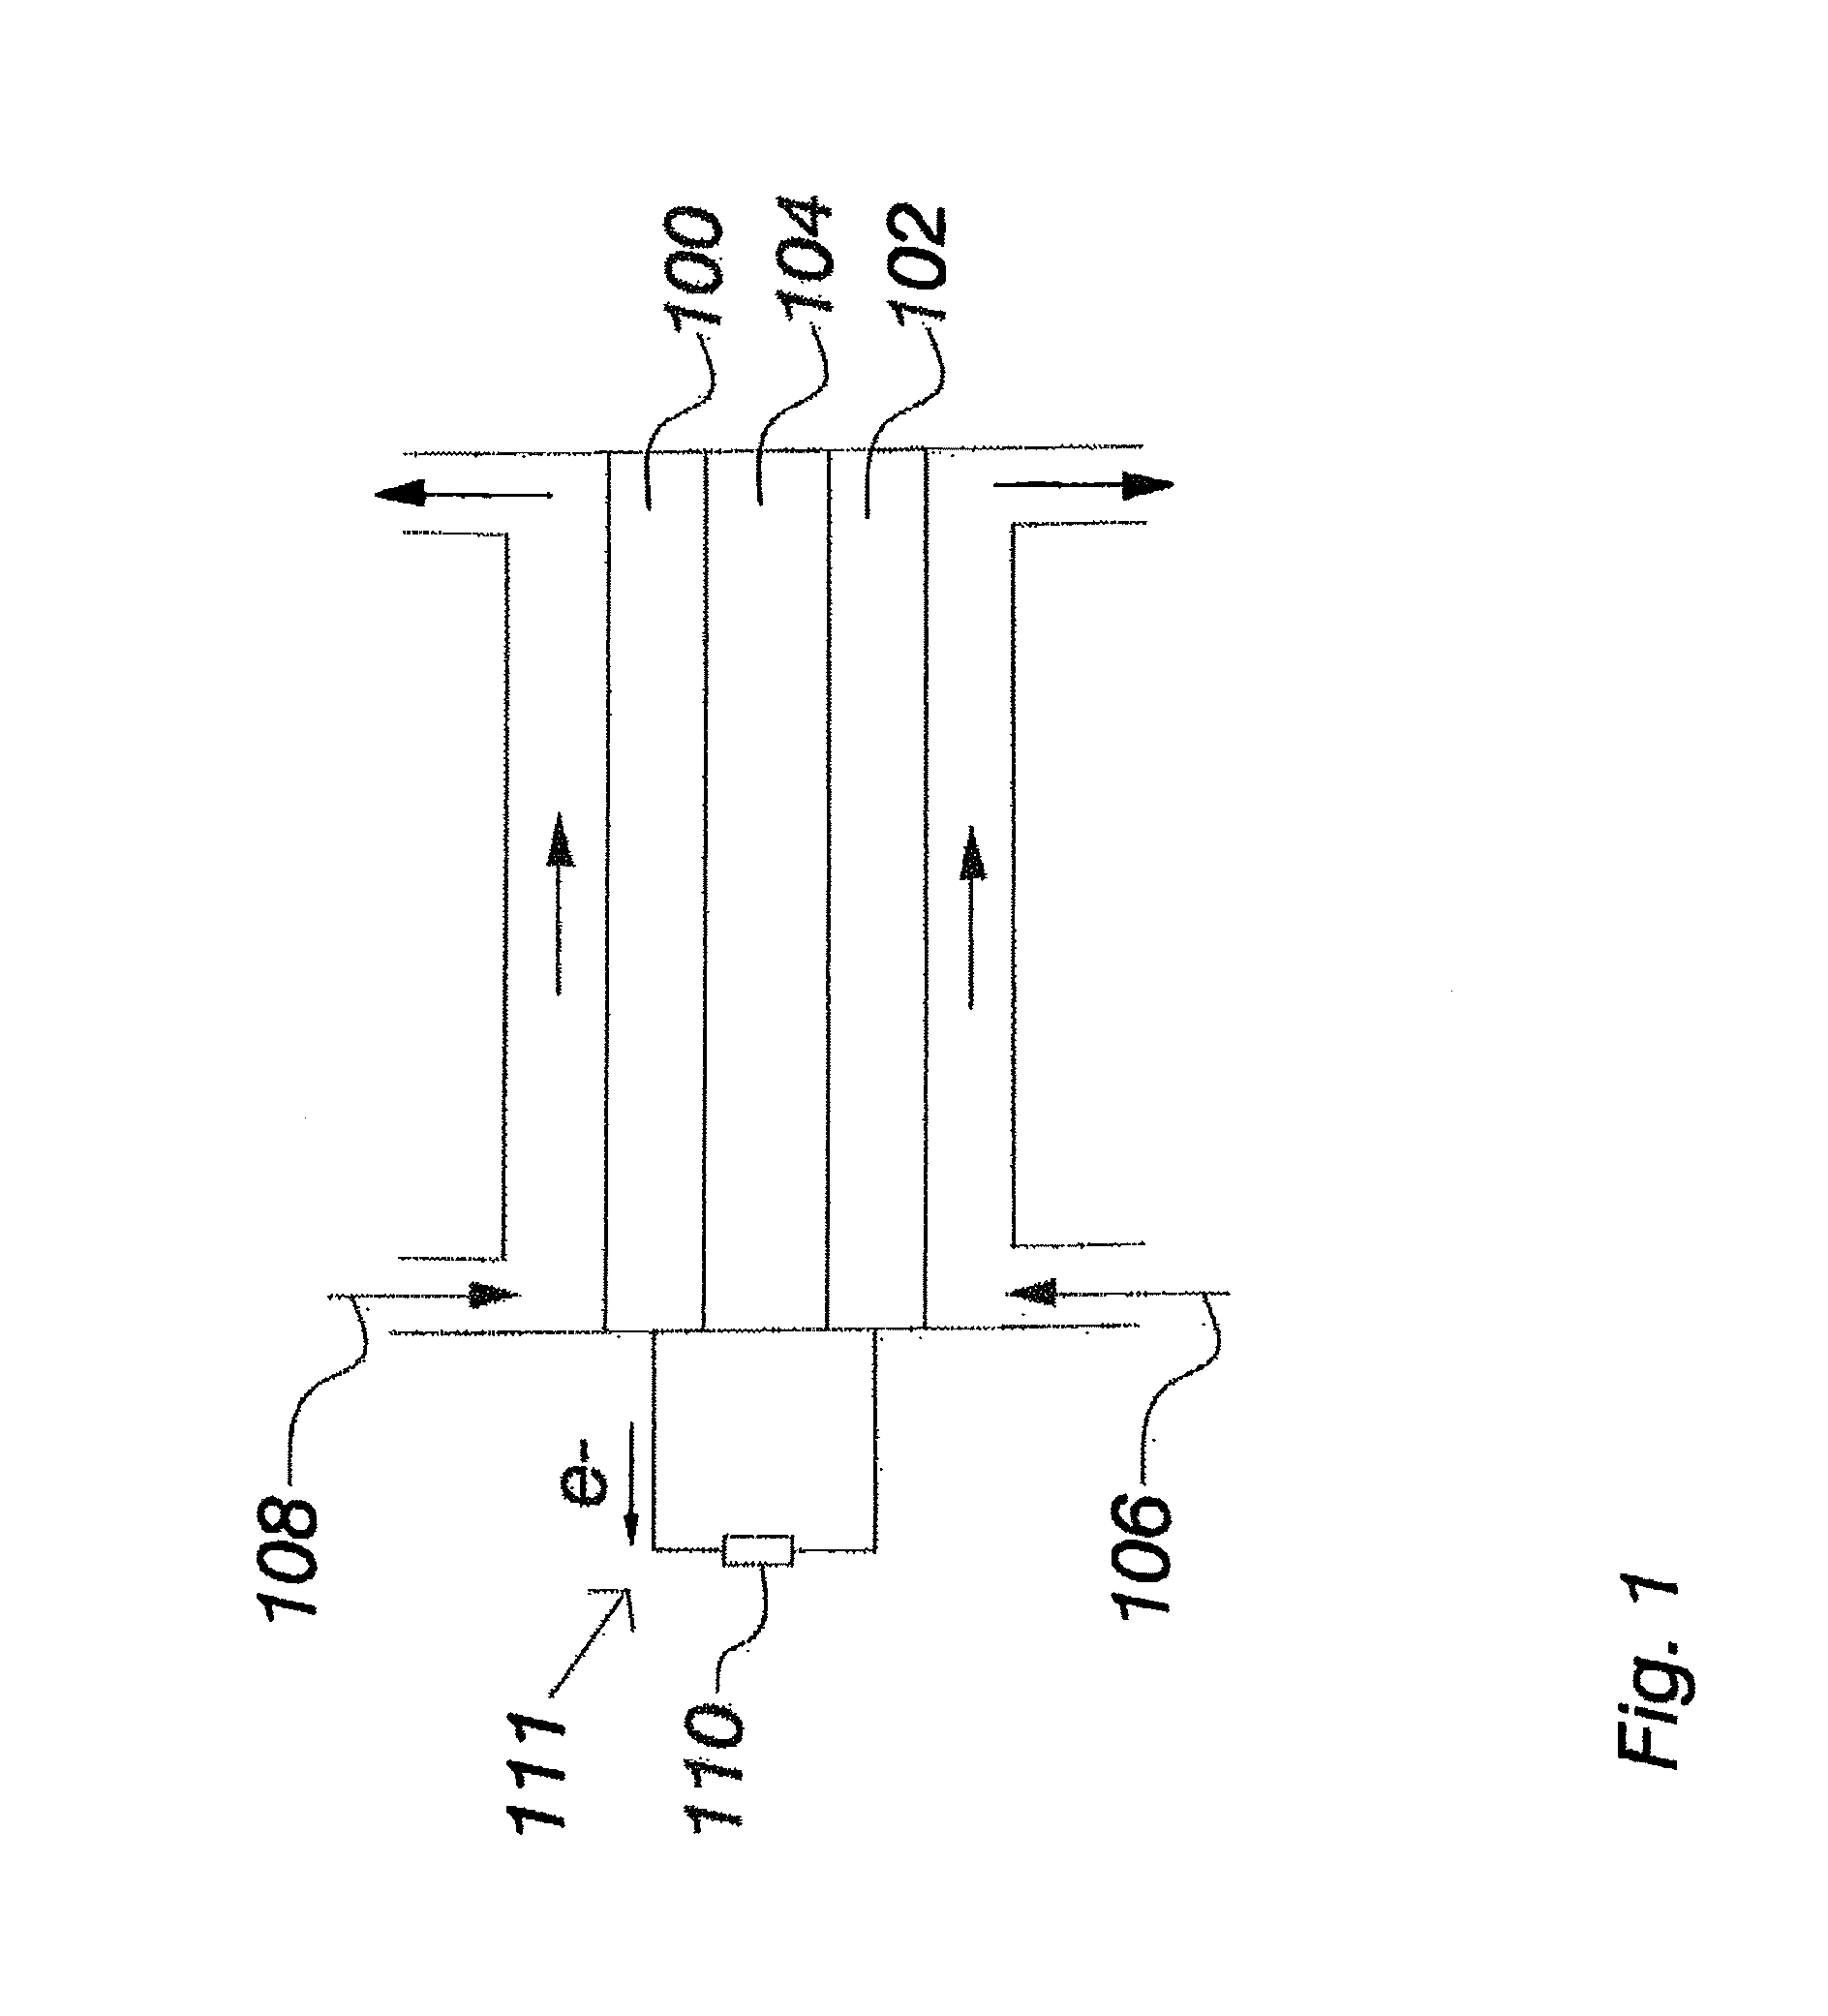 Recirculation arrangement and method for a high temperature cell system